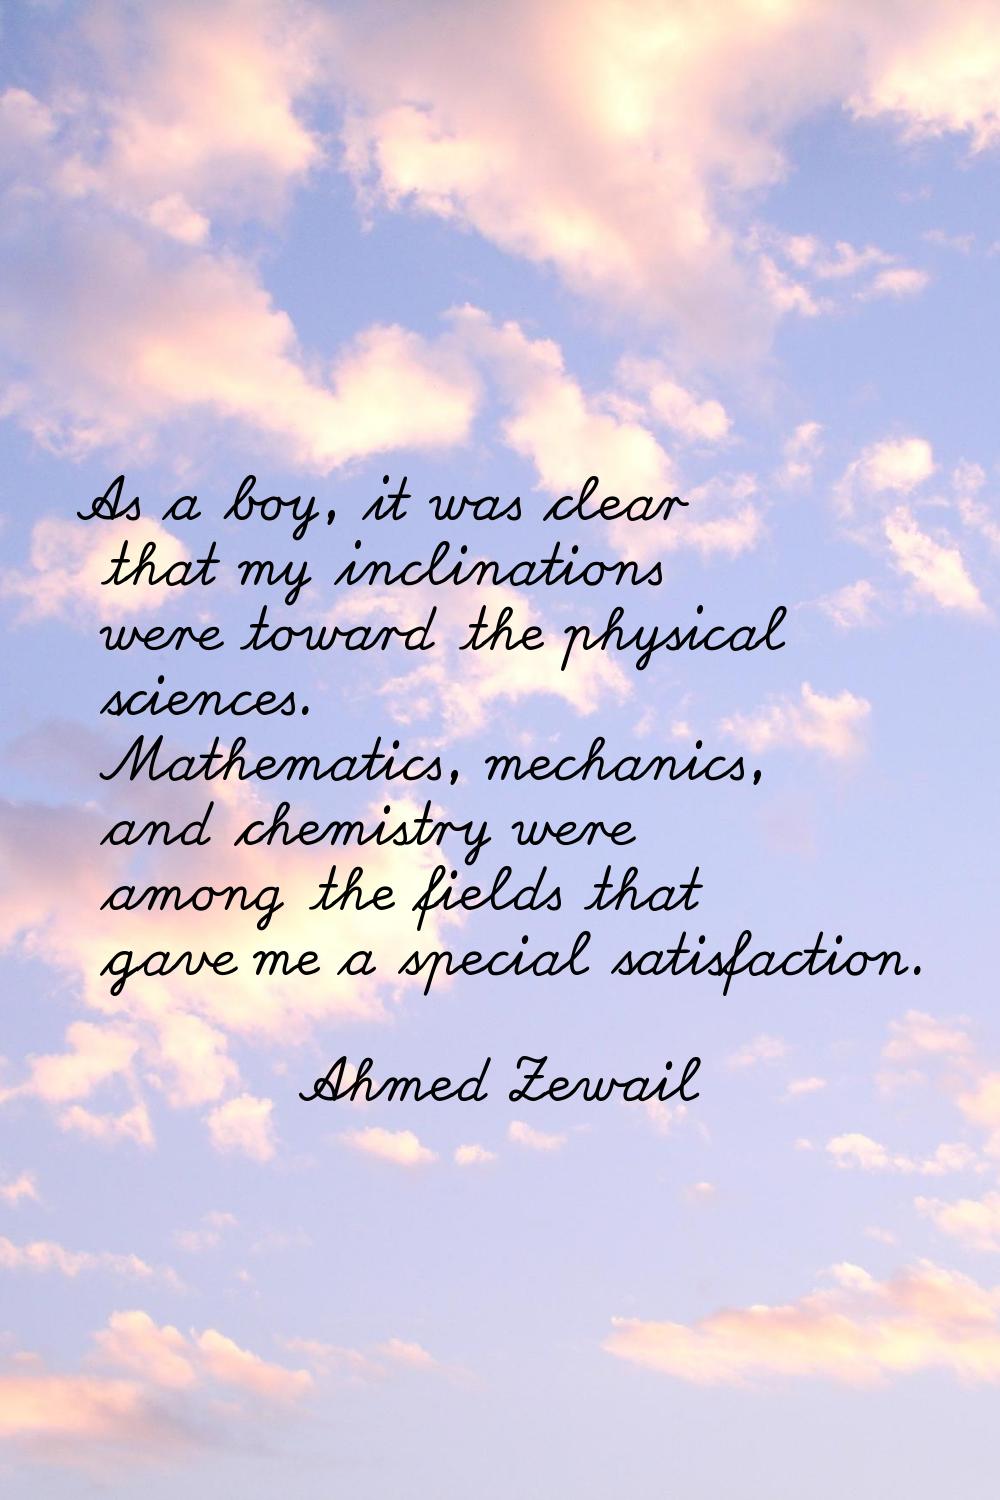 As a boy, it was clear that my inclinations were toward the physical sciences. Mathematics, mechani